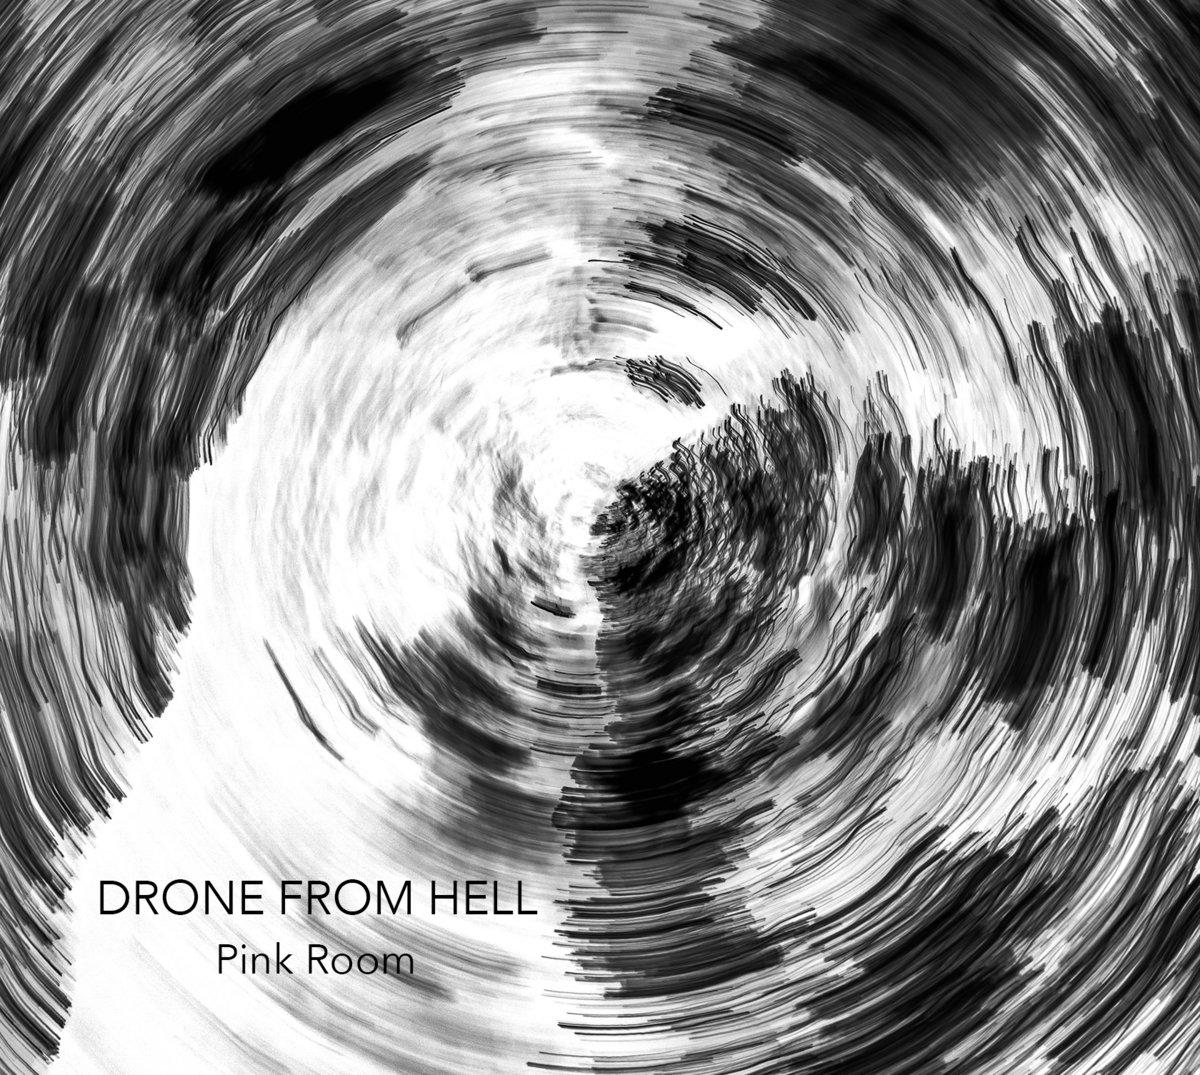 Drone from hell